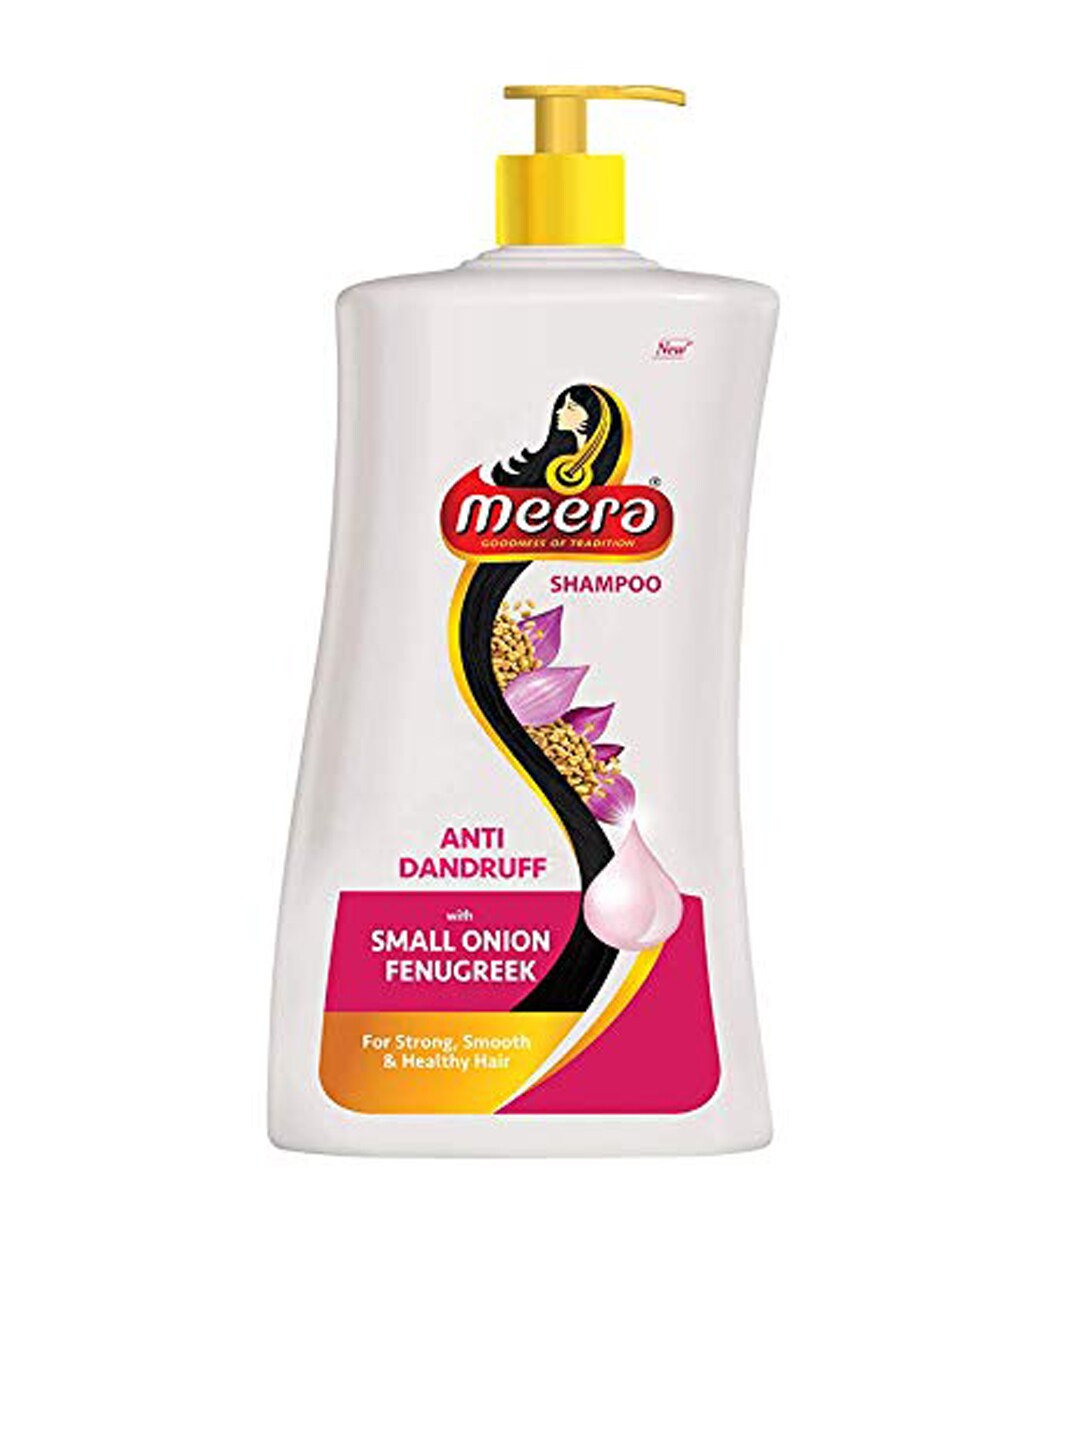 Meera GOODNESS OF TRADITION Anti-Dandruff Shampoo with Small Onion and Fenugreek 1Lt Price in India